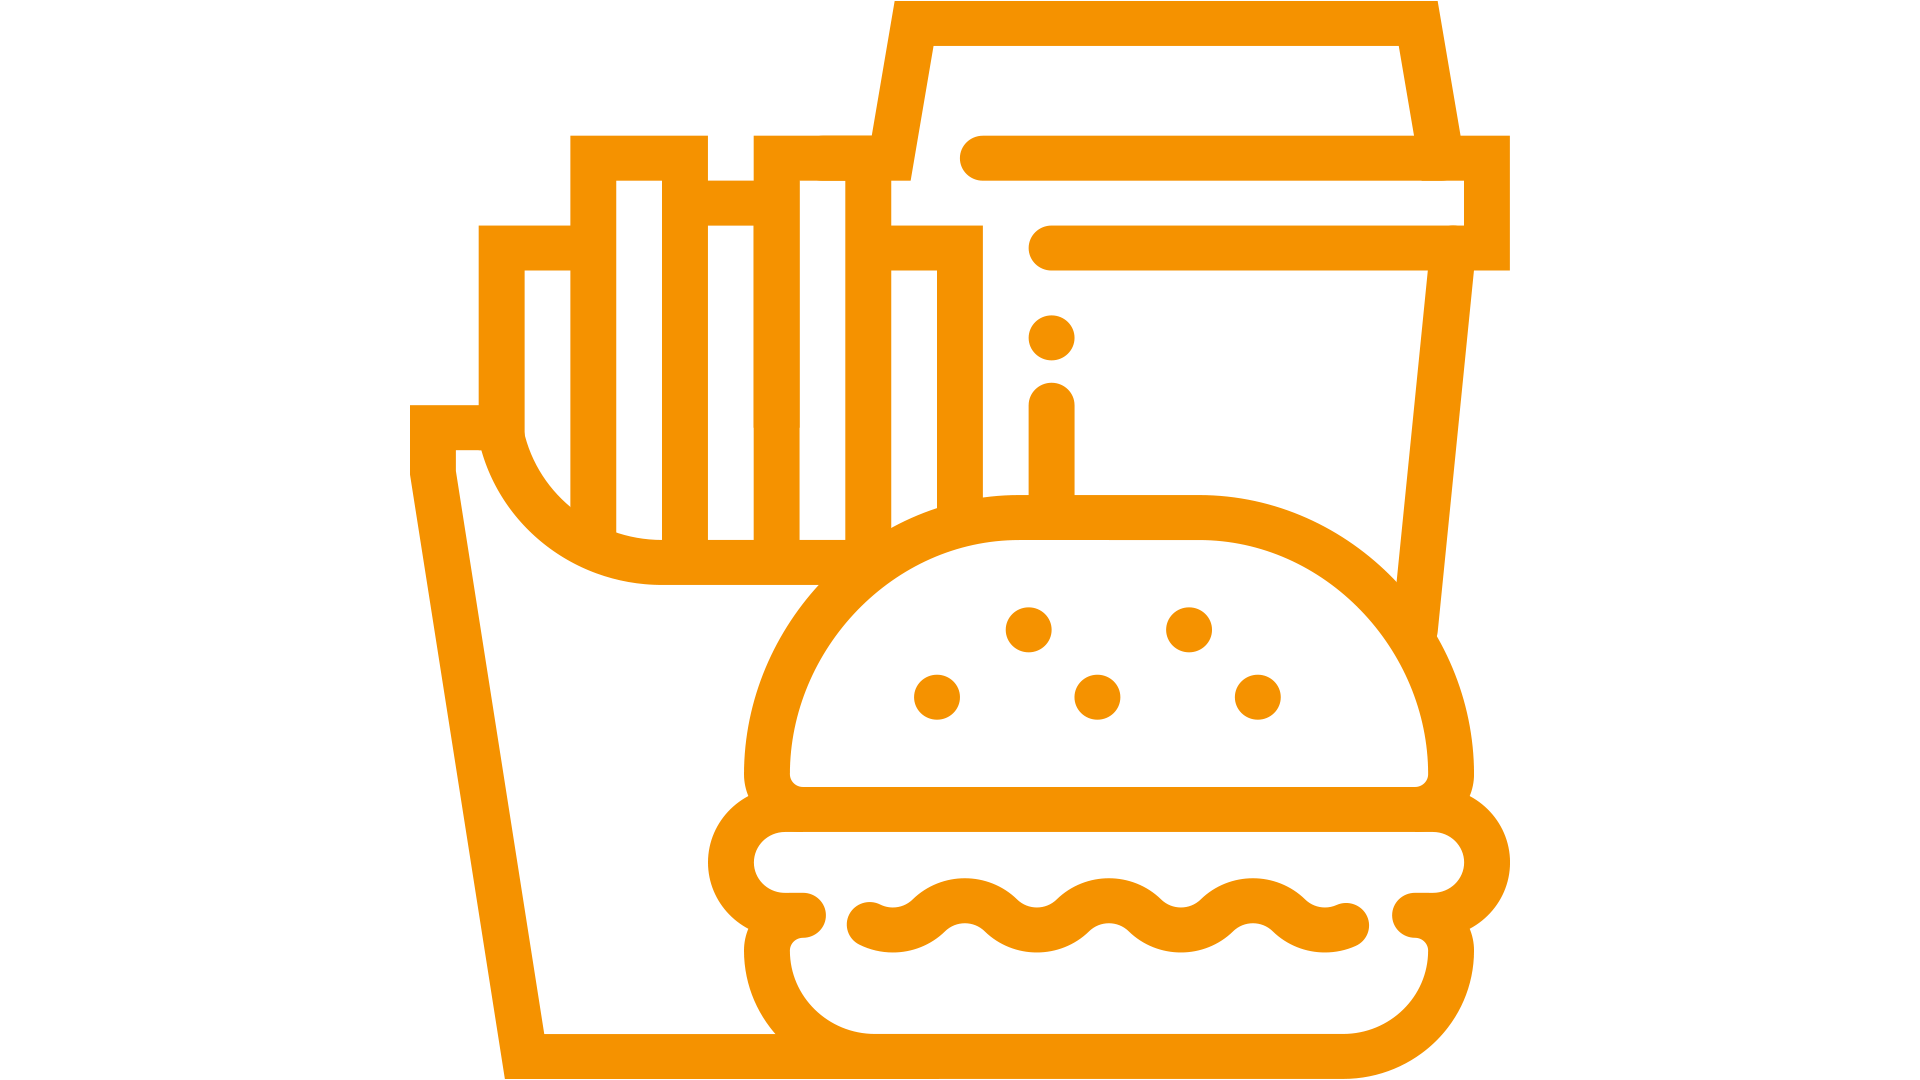 pictogram of a fastfood